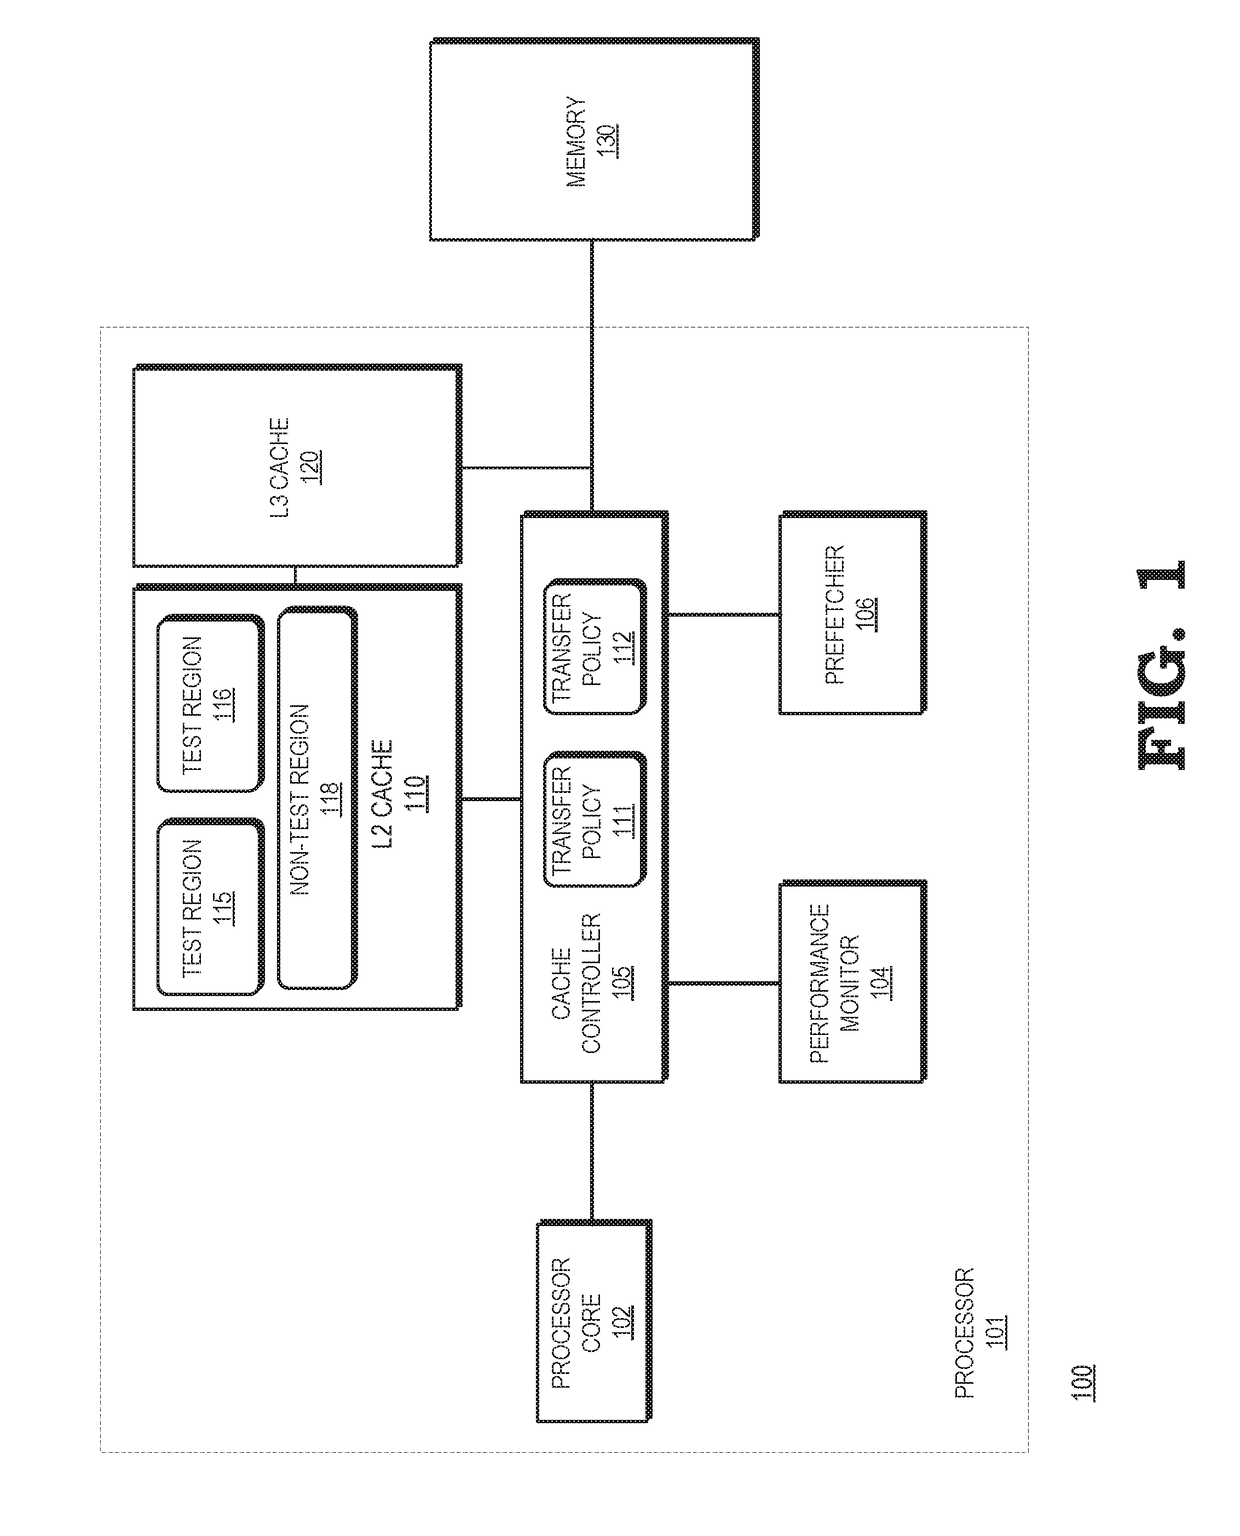 Selecting cache transfer policy for prefetched data based on cache test regions